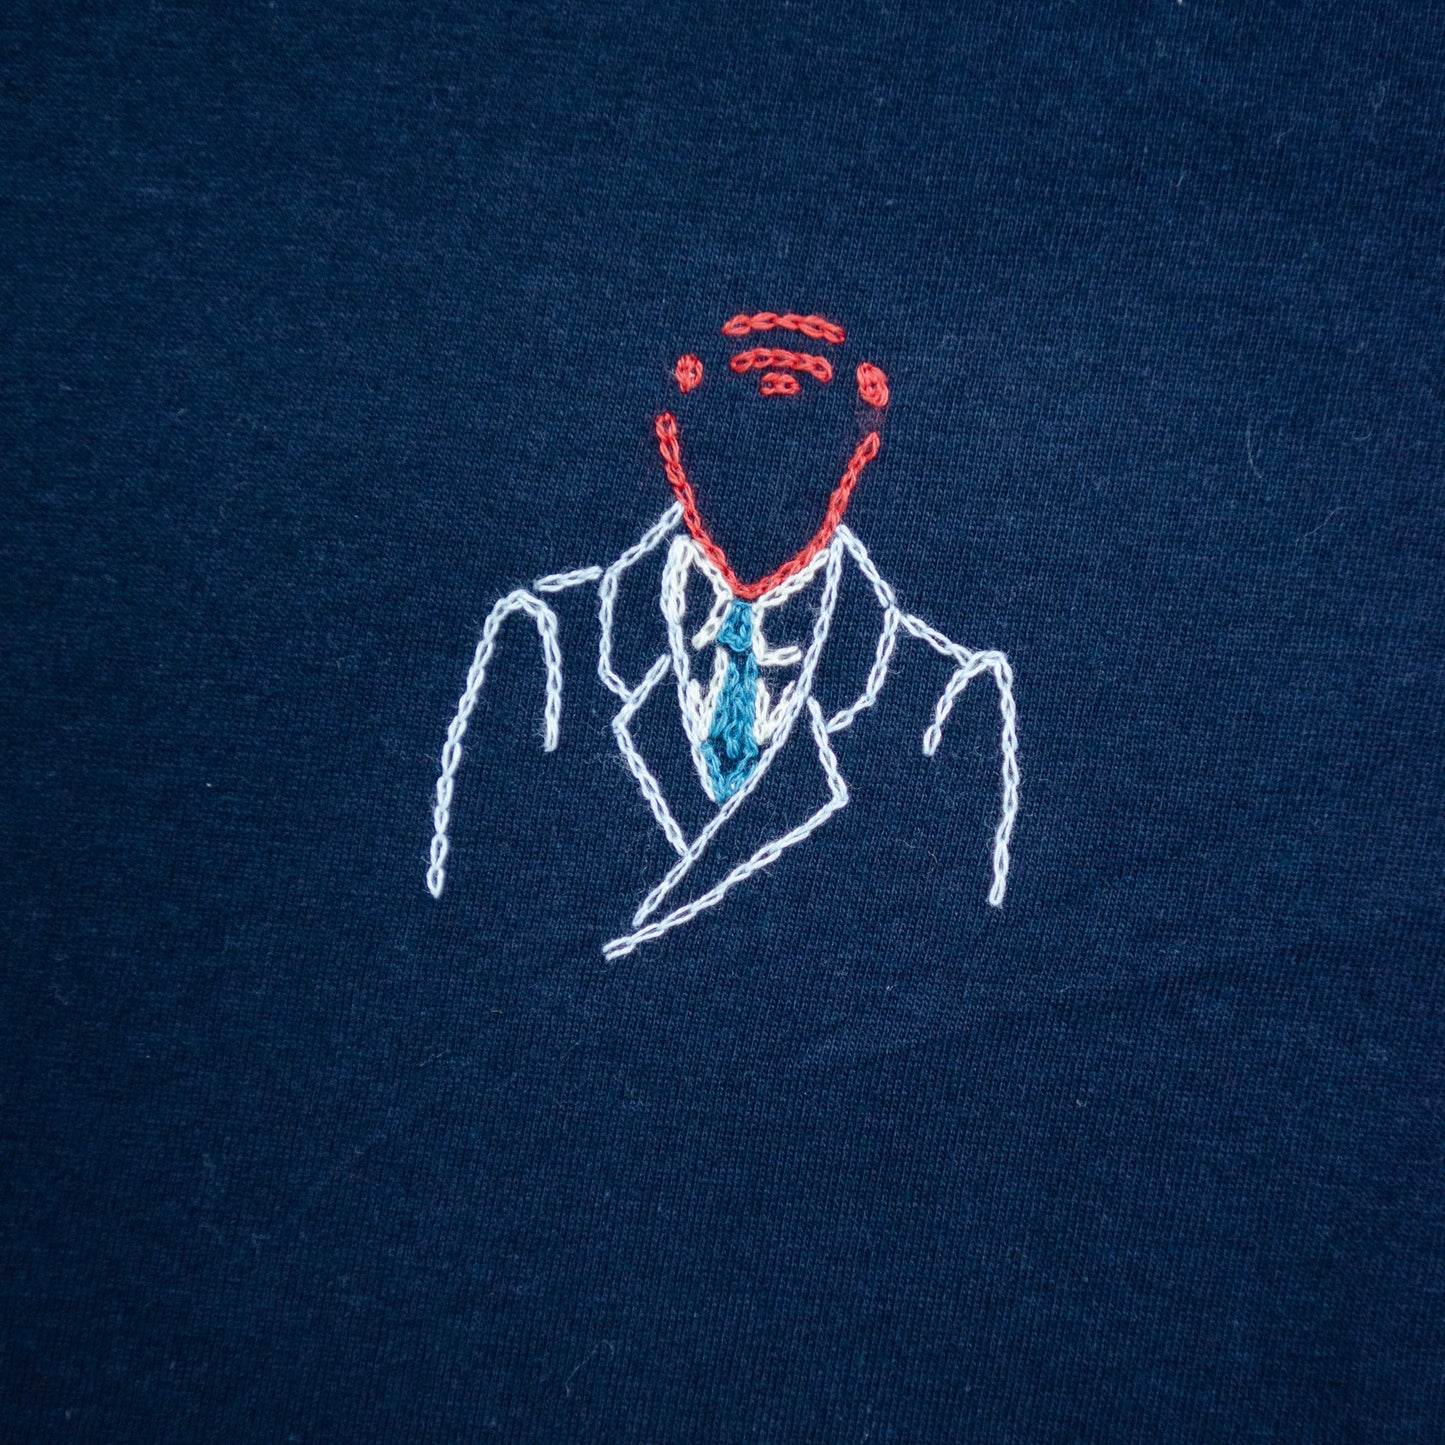 Embroidered T-Shirt - Navy